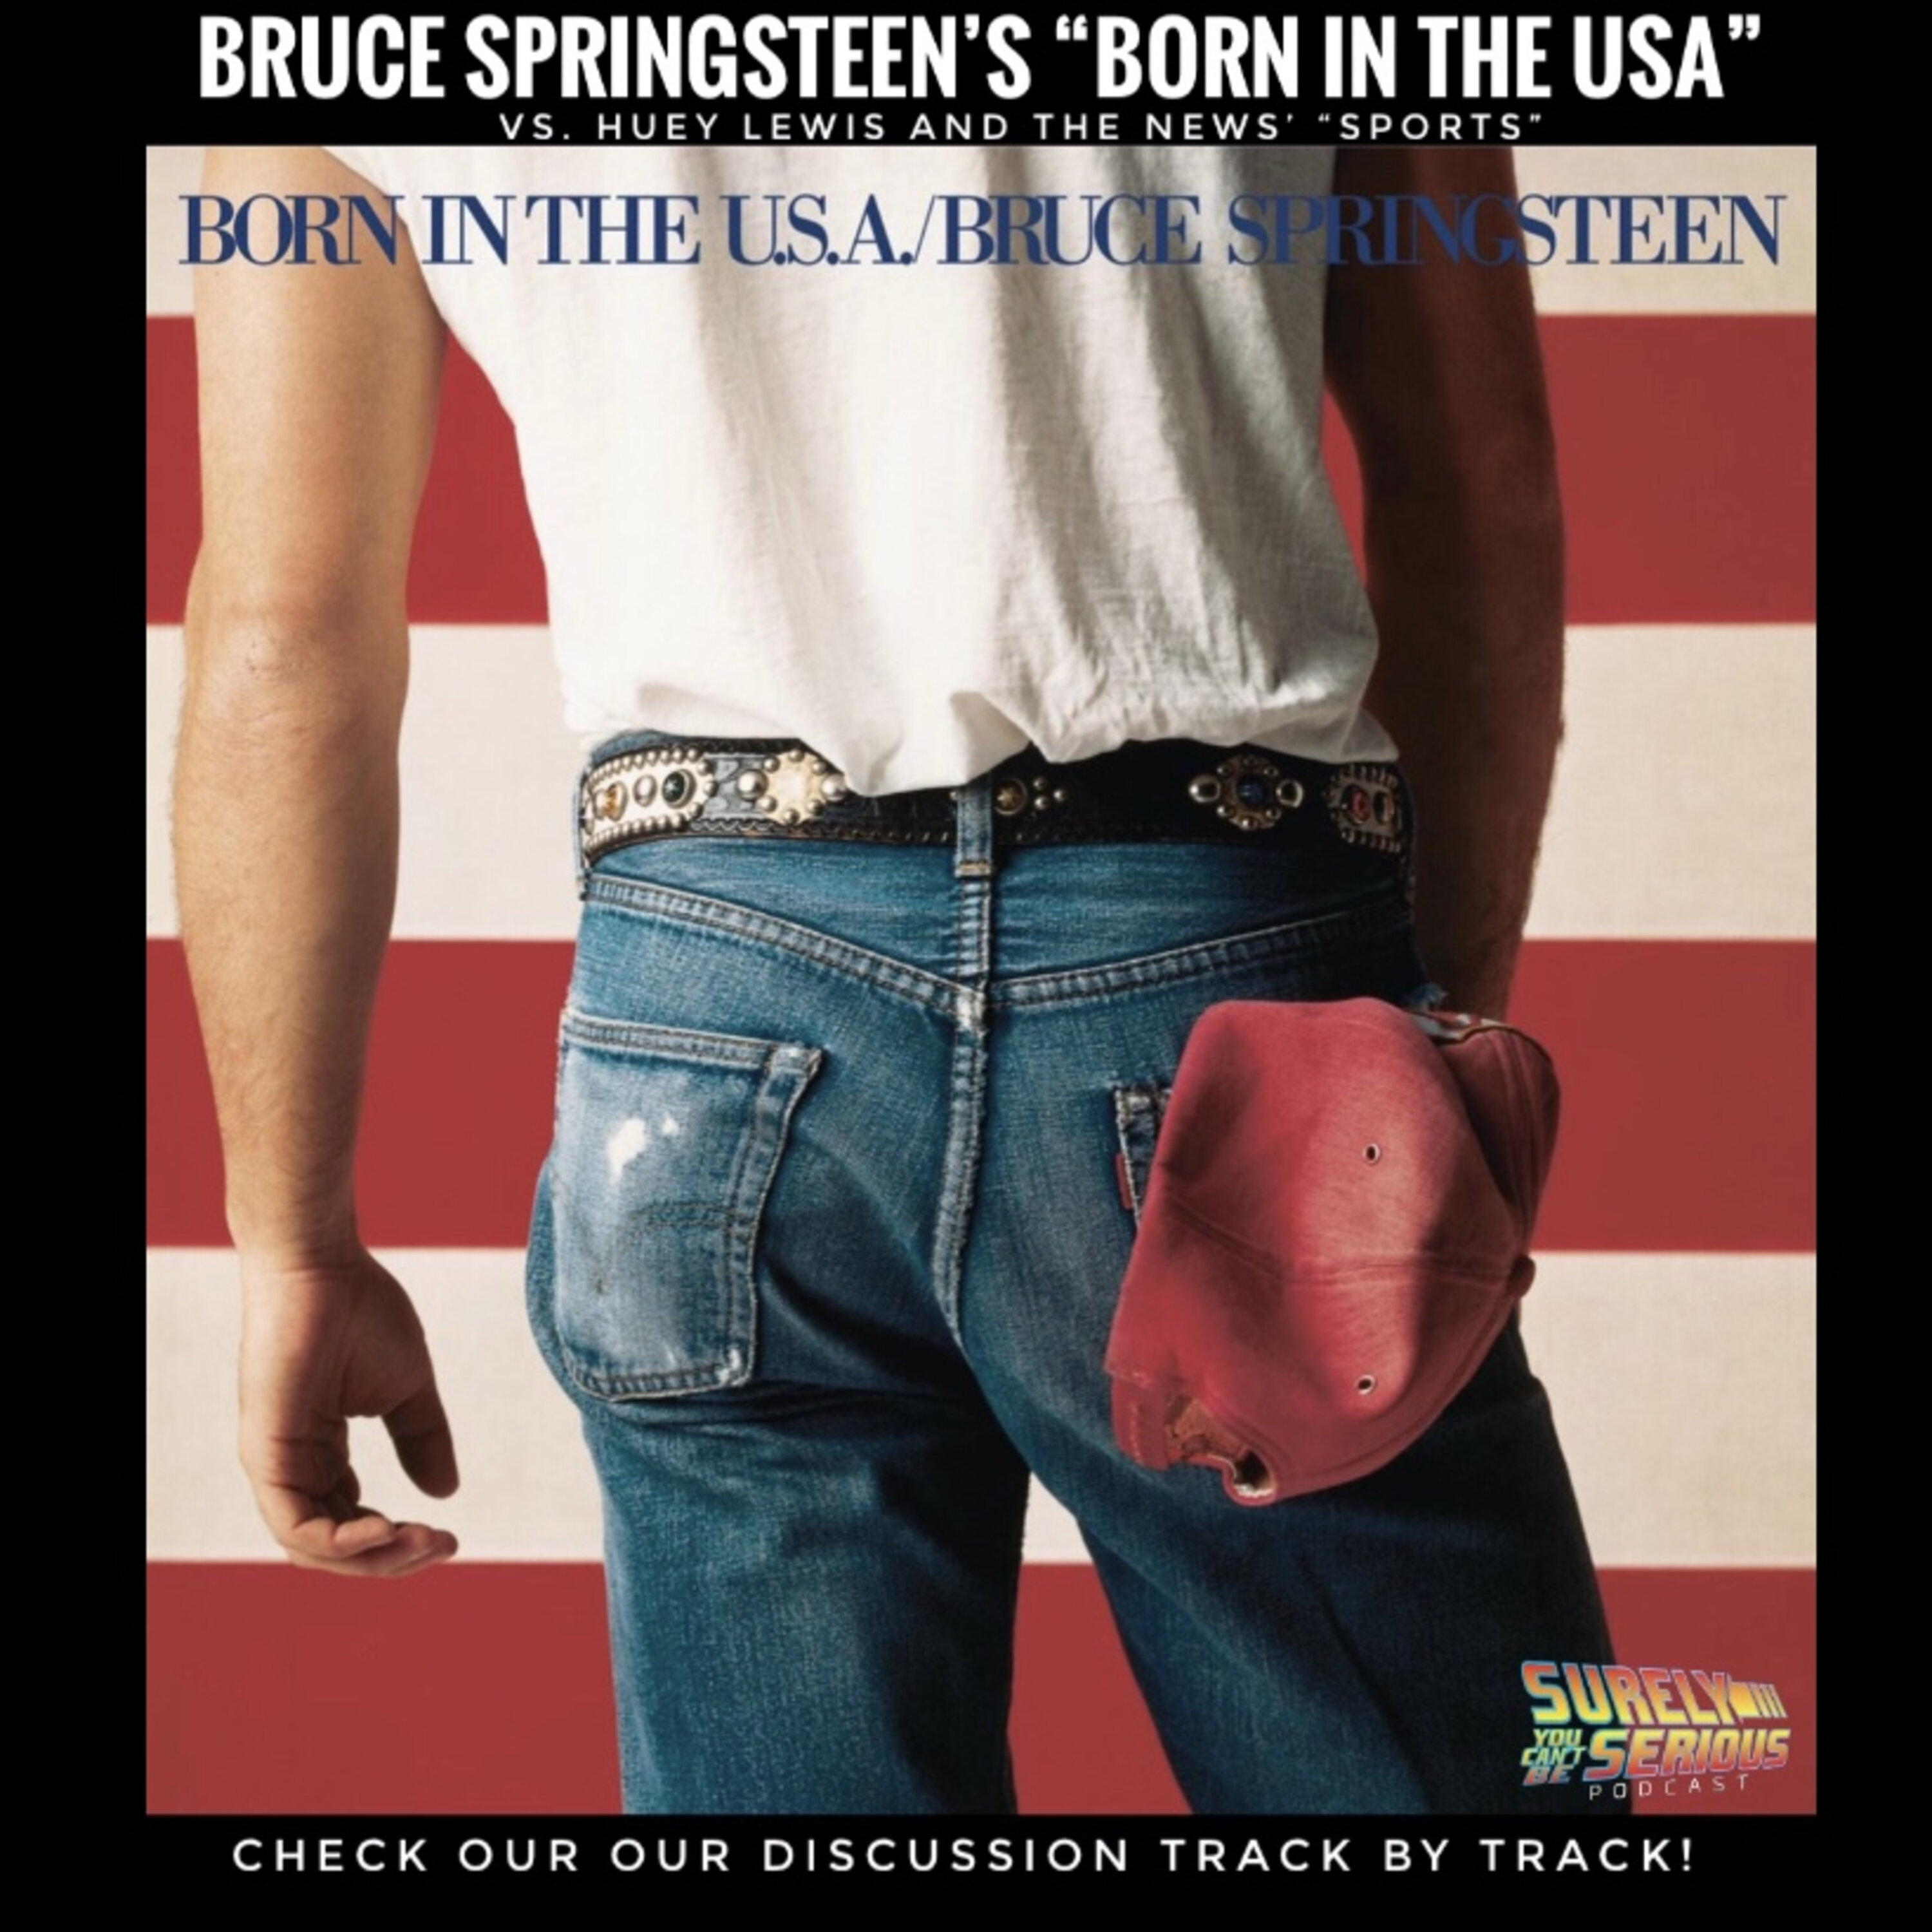 Bruce Springsteen's "Born in the USA" (1984) vs. Huey Lewis "Sports" (1984)